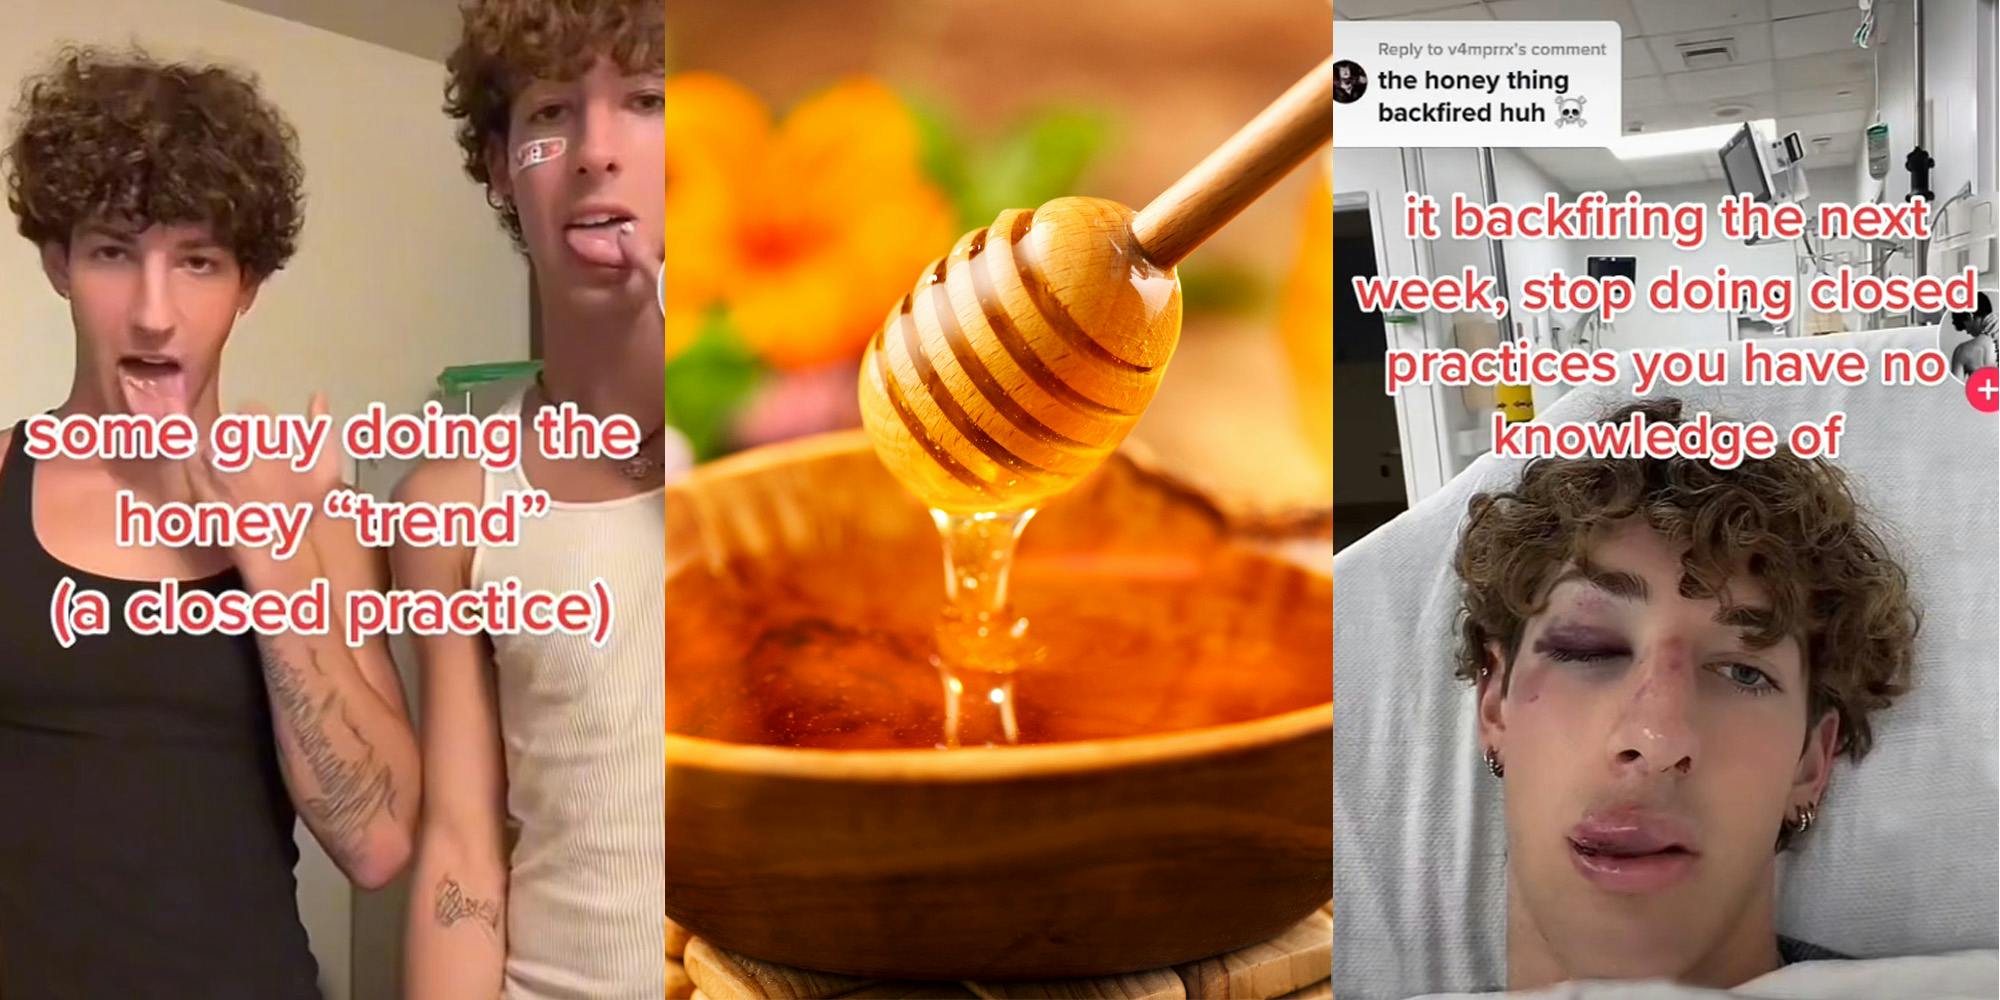 men sticking tongues out putting honey caption "some guy doing the honey "trend" (a closed practice) (l) honey dripping off of honey dipper (c) man in hospital caption "the honey thing backfired huh" "it backfired the next week, stop doing closed practices you have no knowledge of" (r)